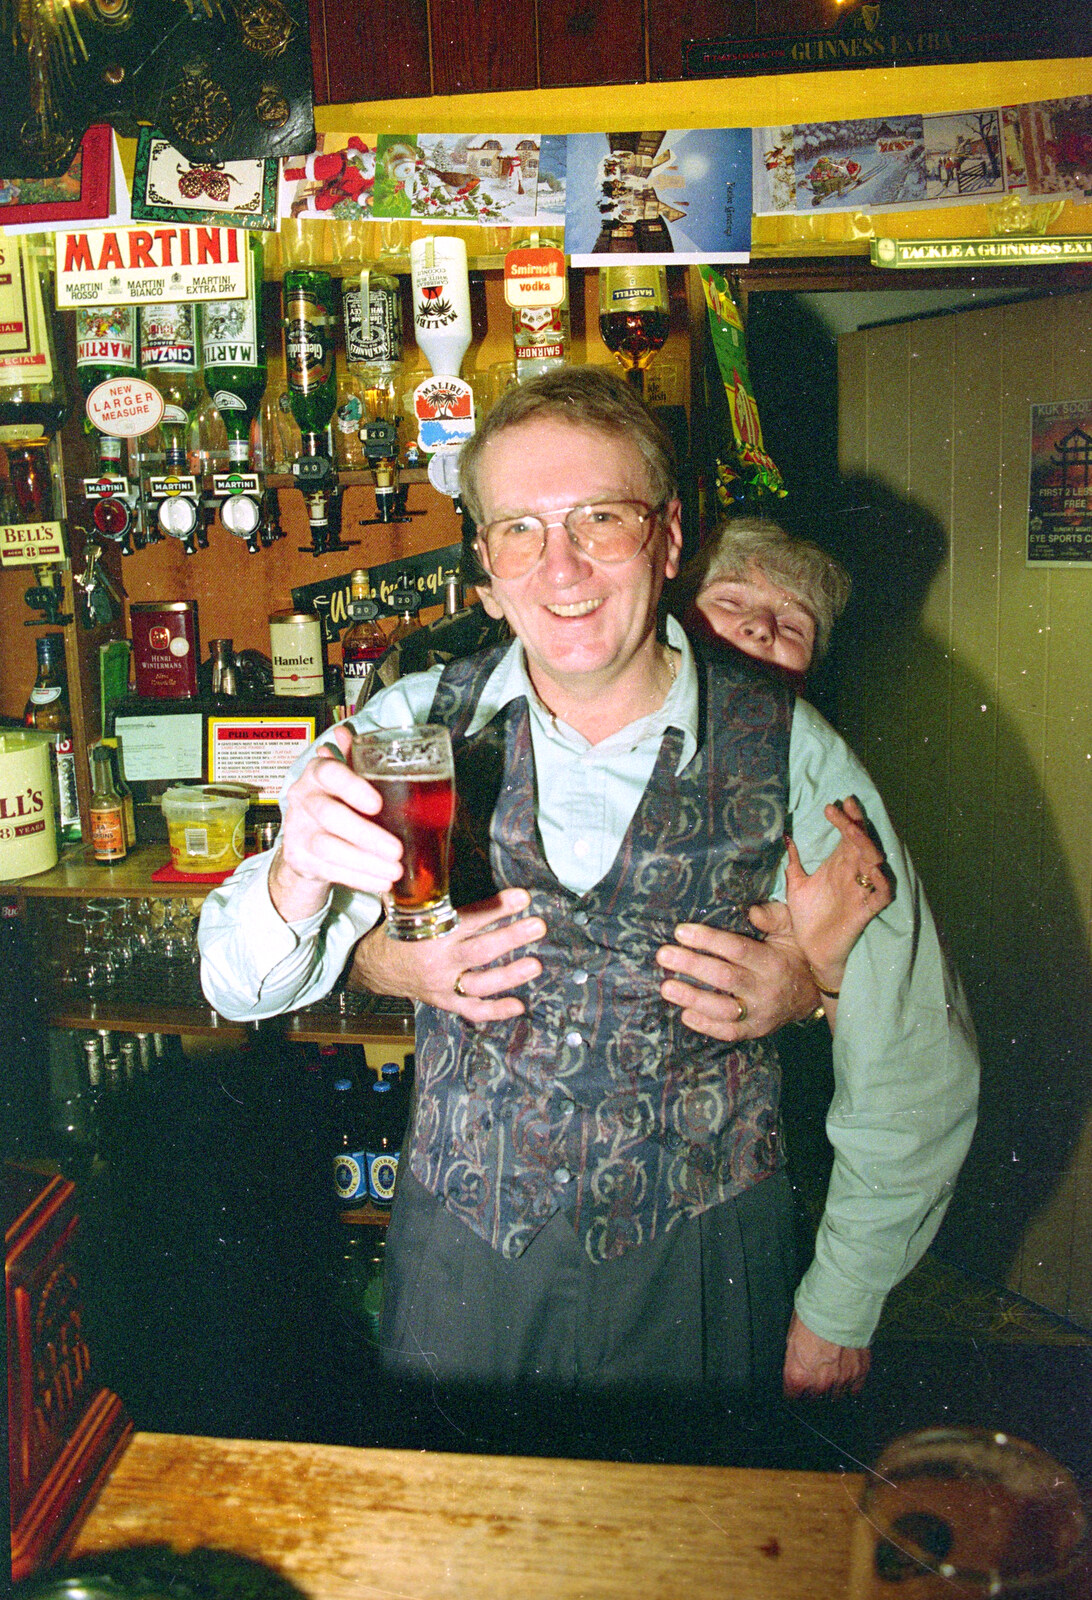 John Willy gets a hug from Spam from New Year's Eve in the Swan Inn, Brome, Suffolk - 31st December 1995